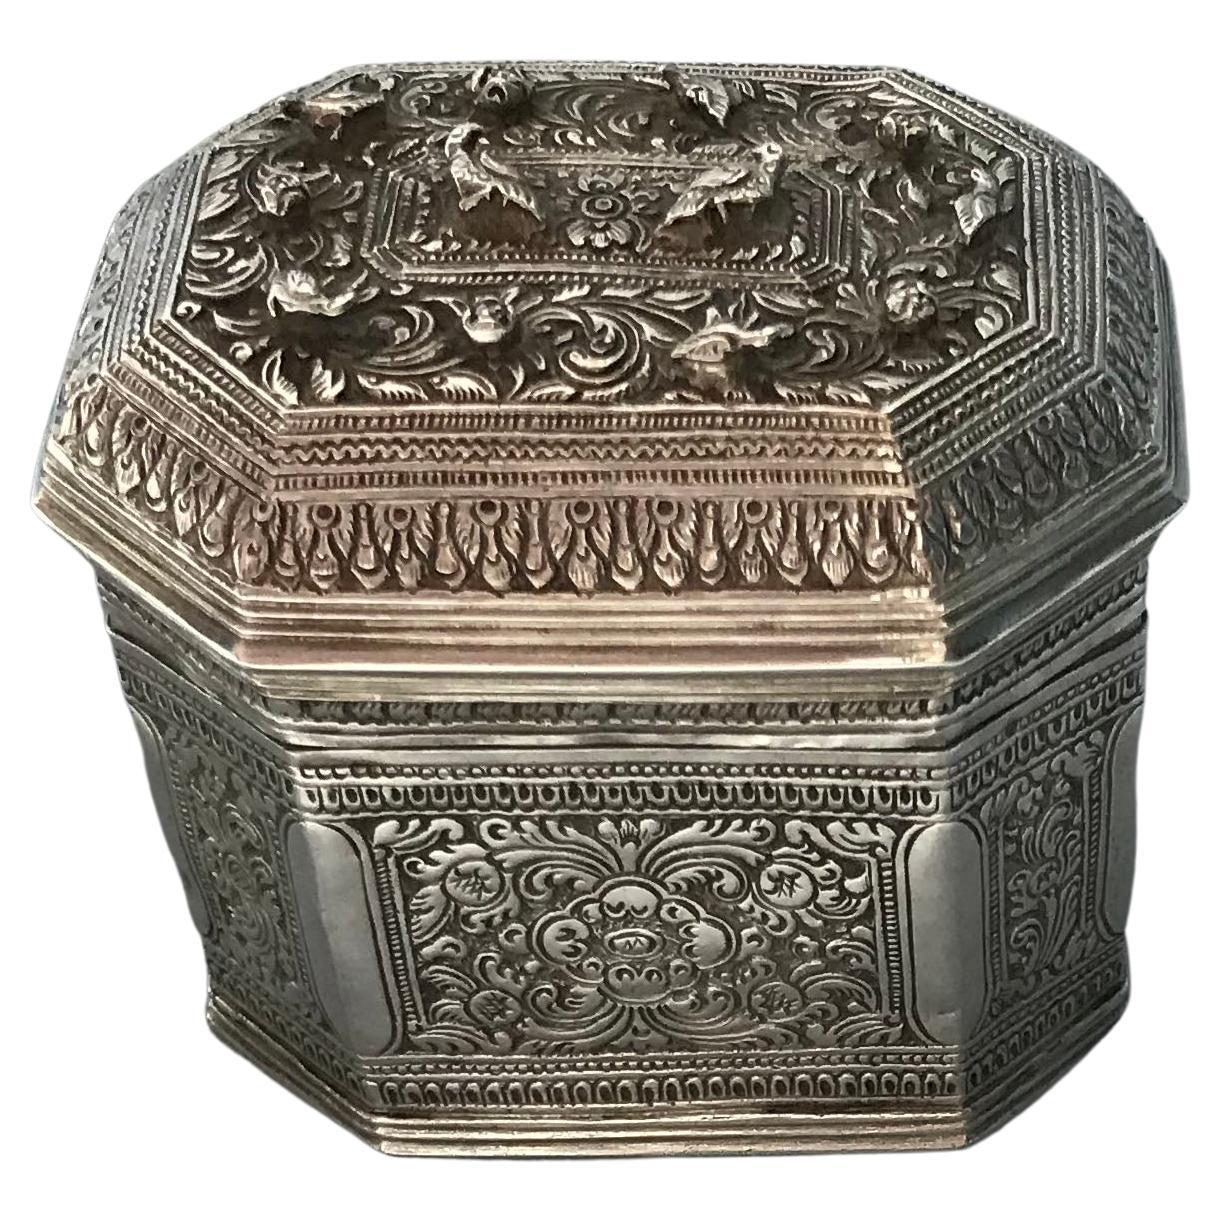 Antique Silver Betel Box Laotian Silver Lao Laos South East Asian Antiques Gifts